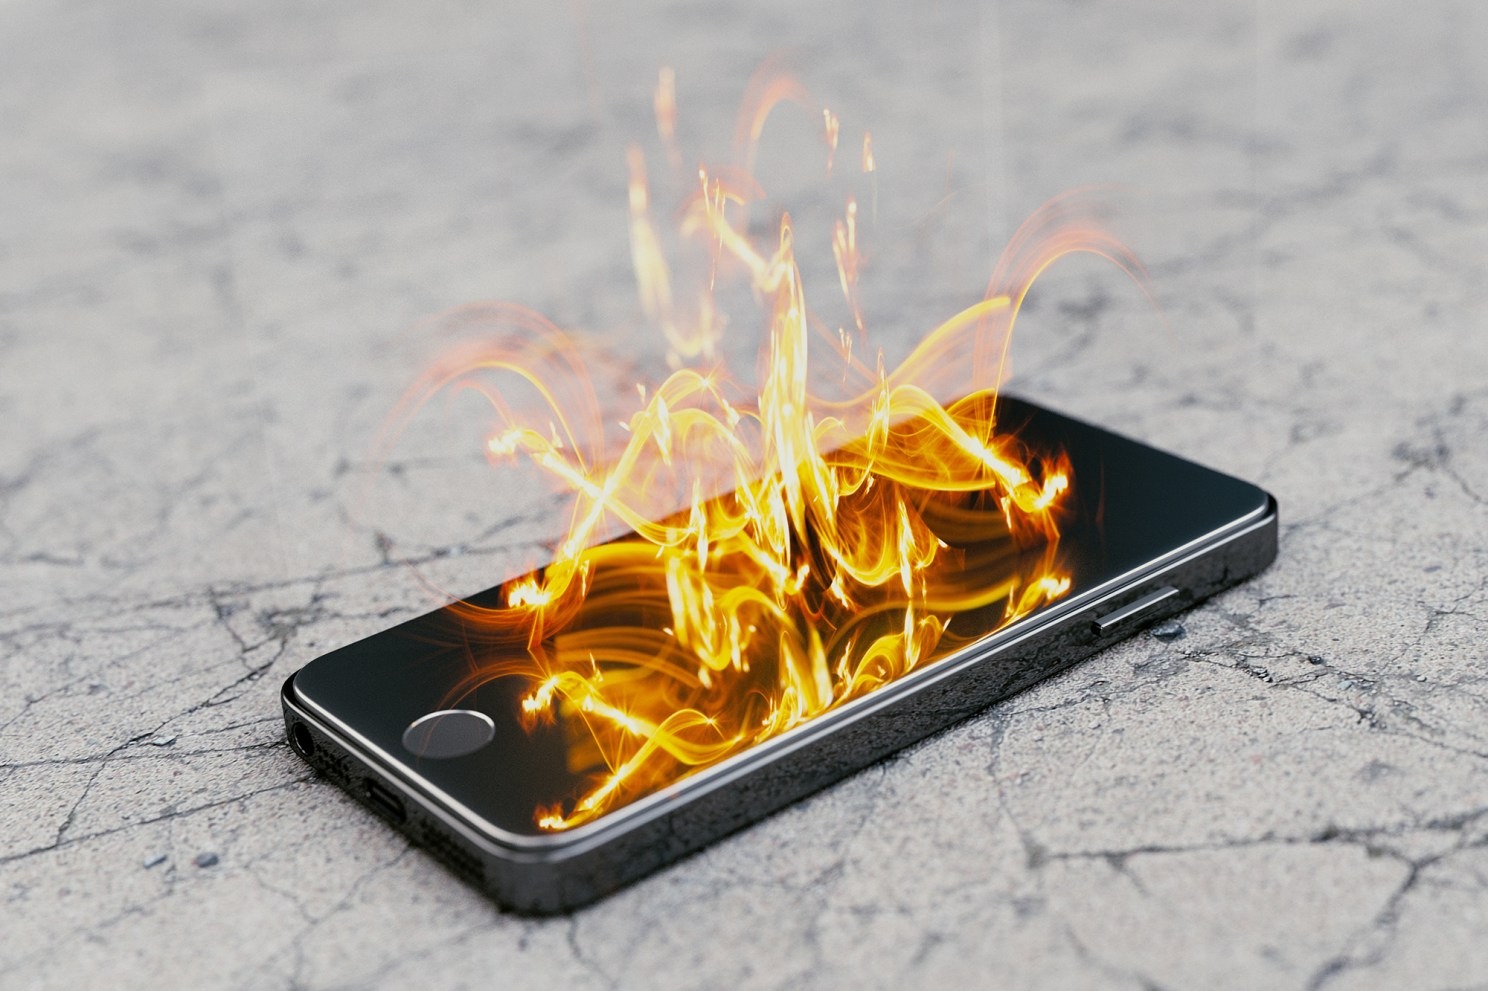 Should You Be Worried About Your iPhone Exploding?